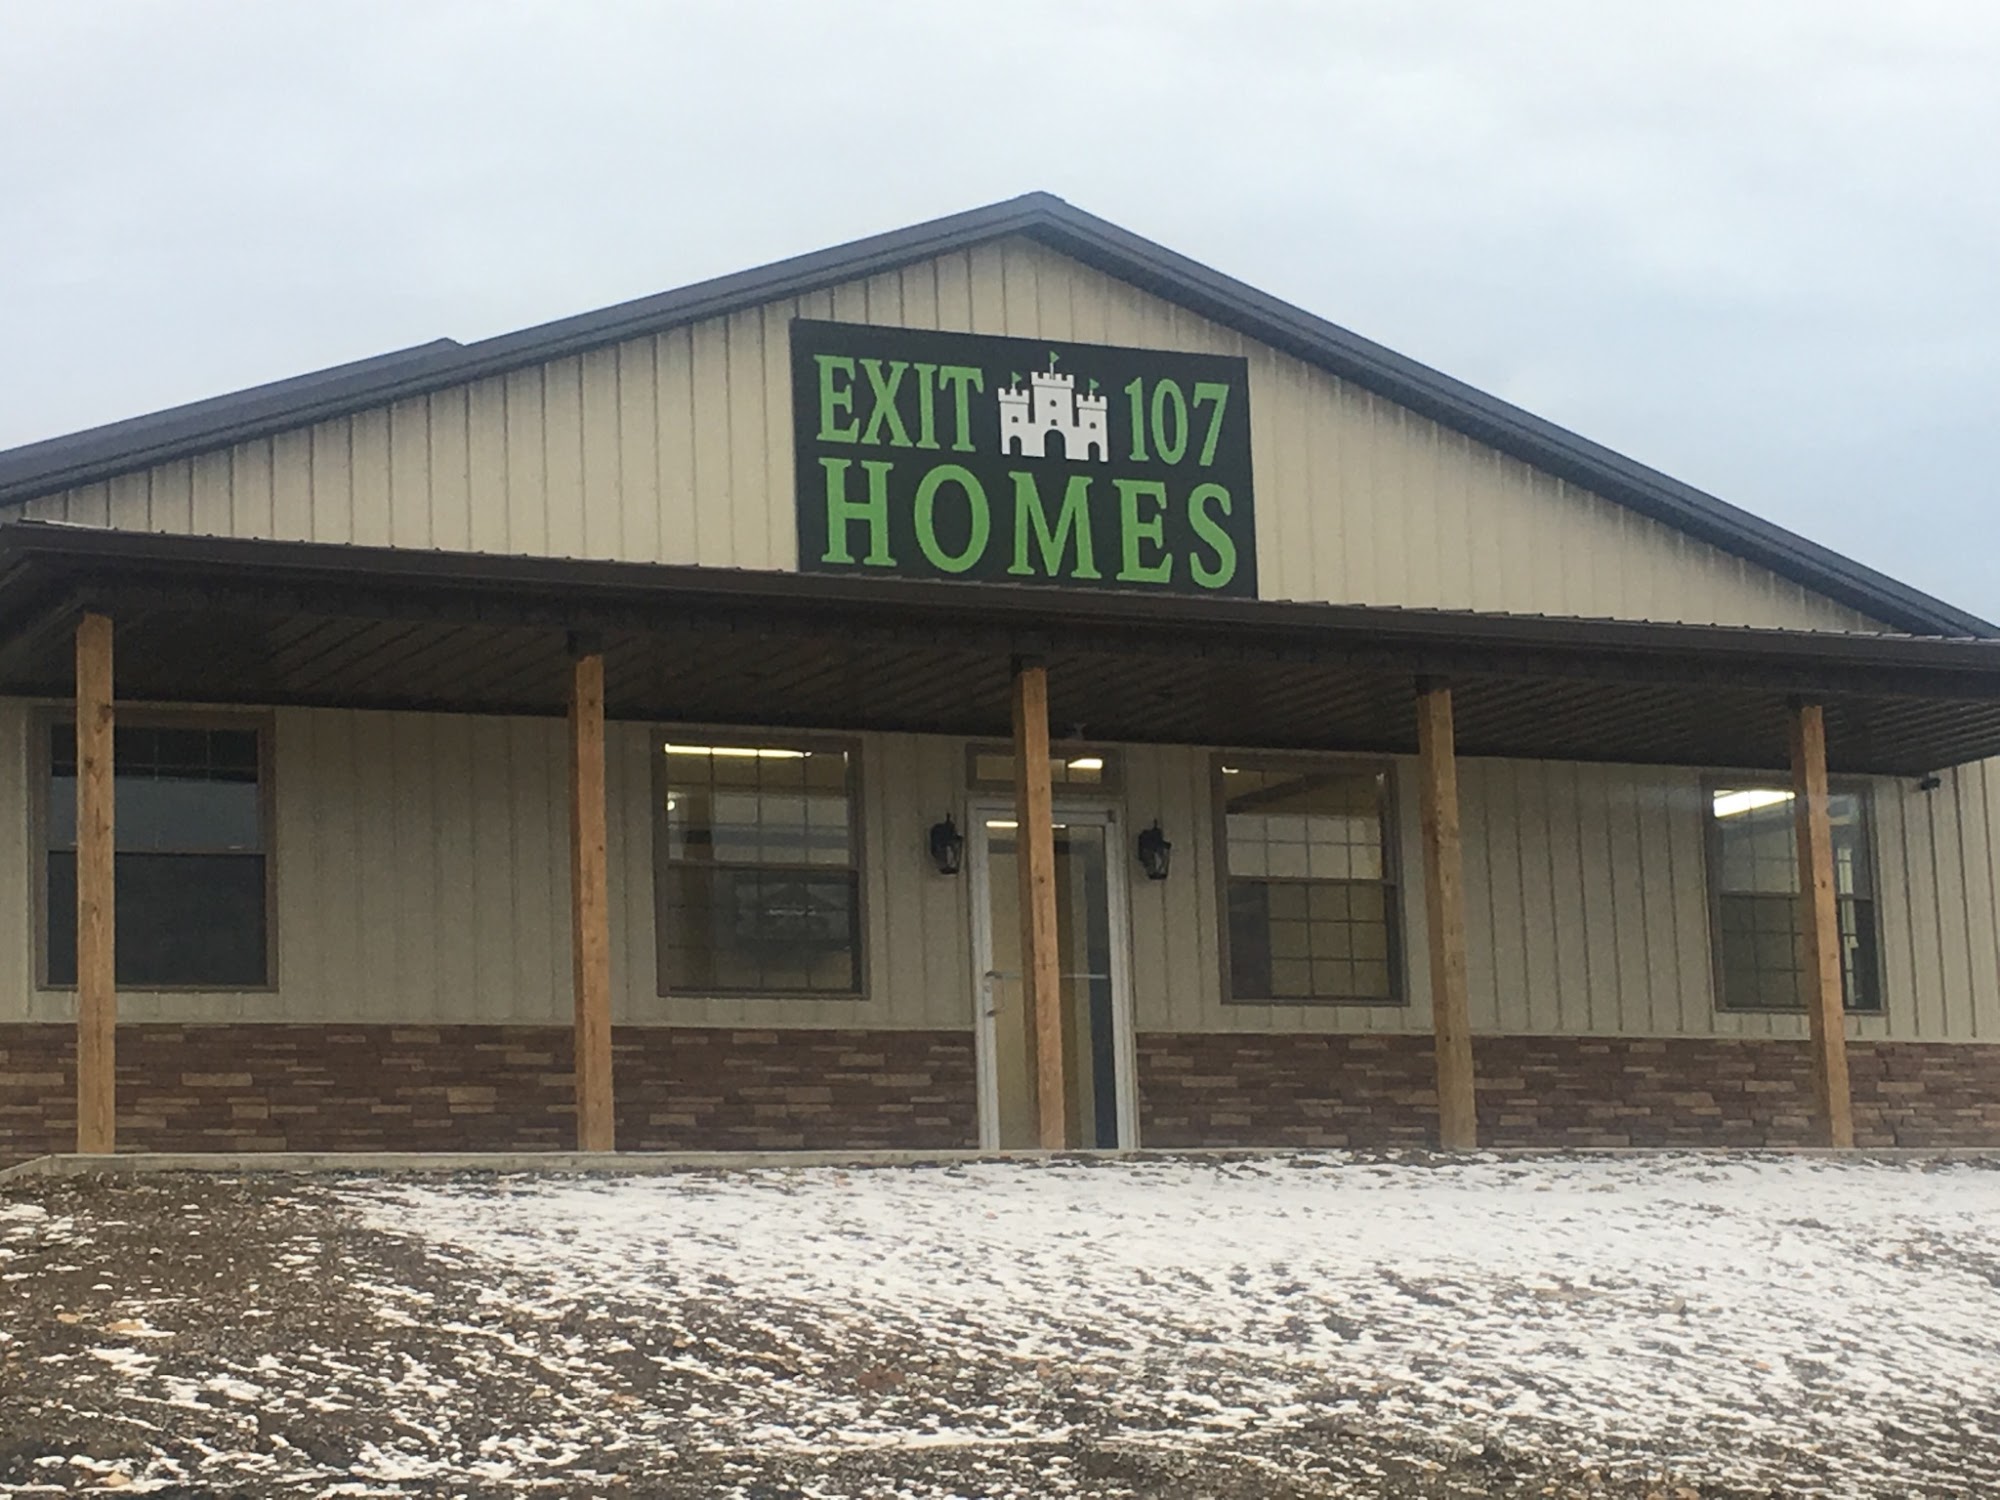 Exit 107 Homes 280 Commerce Dr, Leitchfield Kentucky 42754